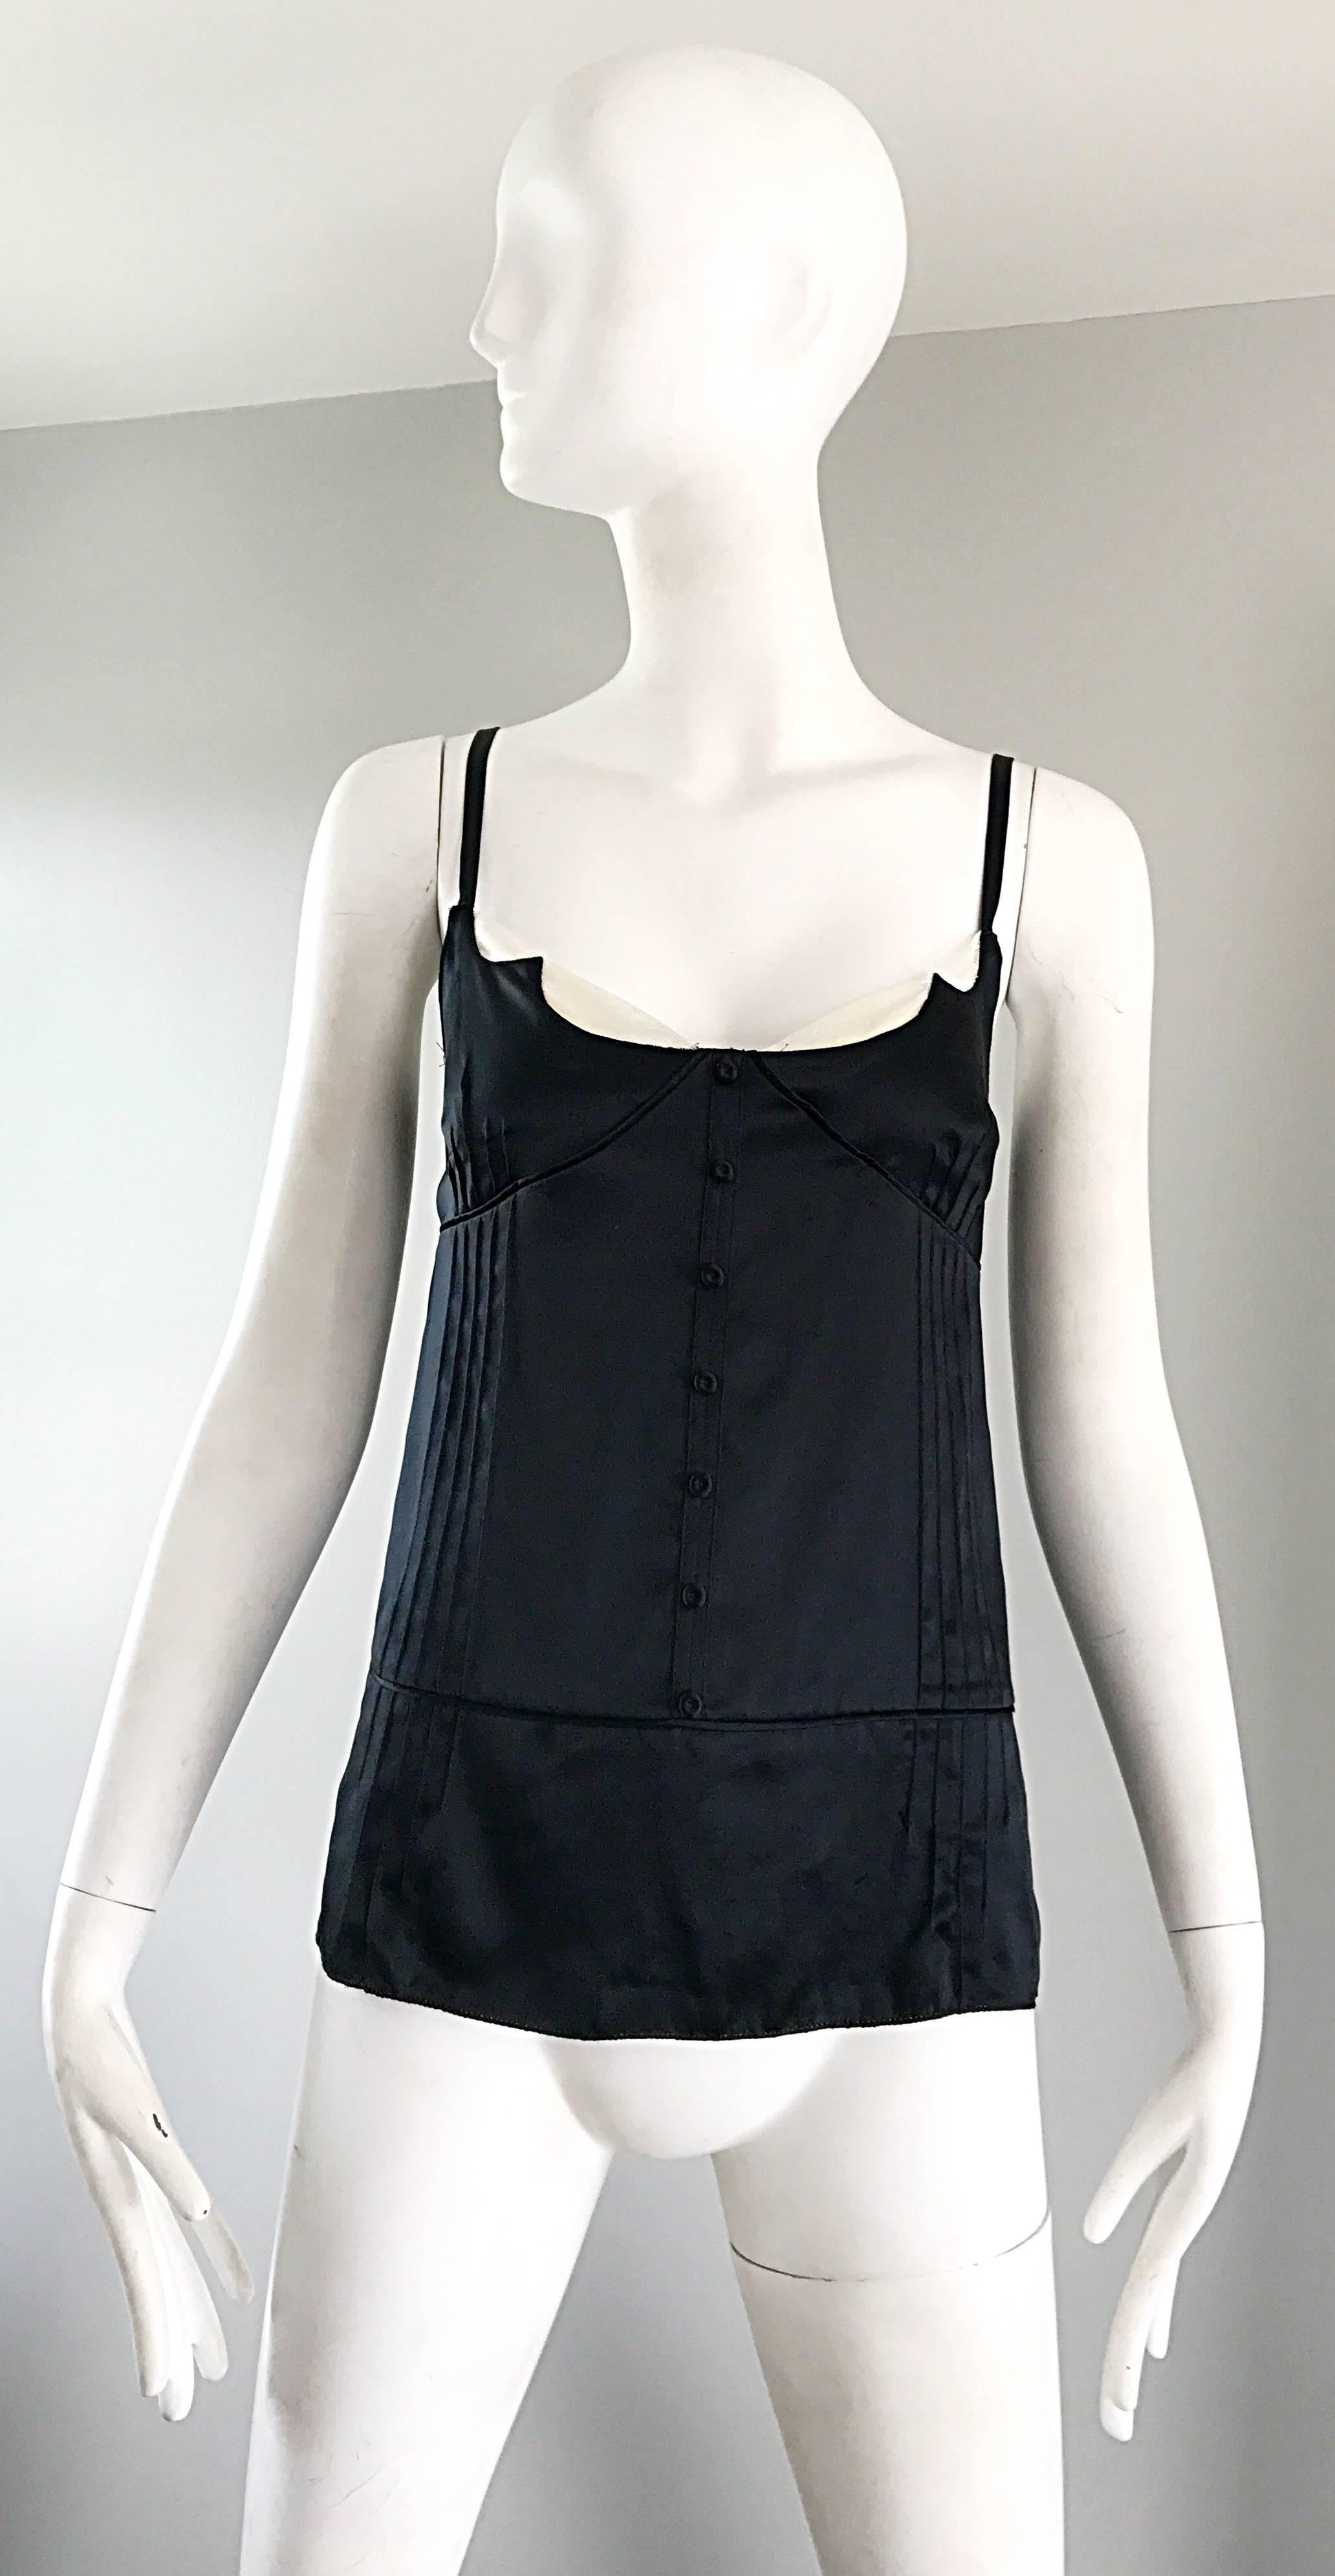 Chic MARC JACOBS black and white silk camisole tuxedo top! Resembles a tuxedo, with seven mock buttons up the front. Angular cut bust with white silk under. Hidden zipper up the side with hook-and-eye closure. Adjustable sleeve straps can be made